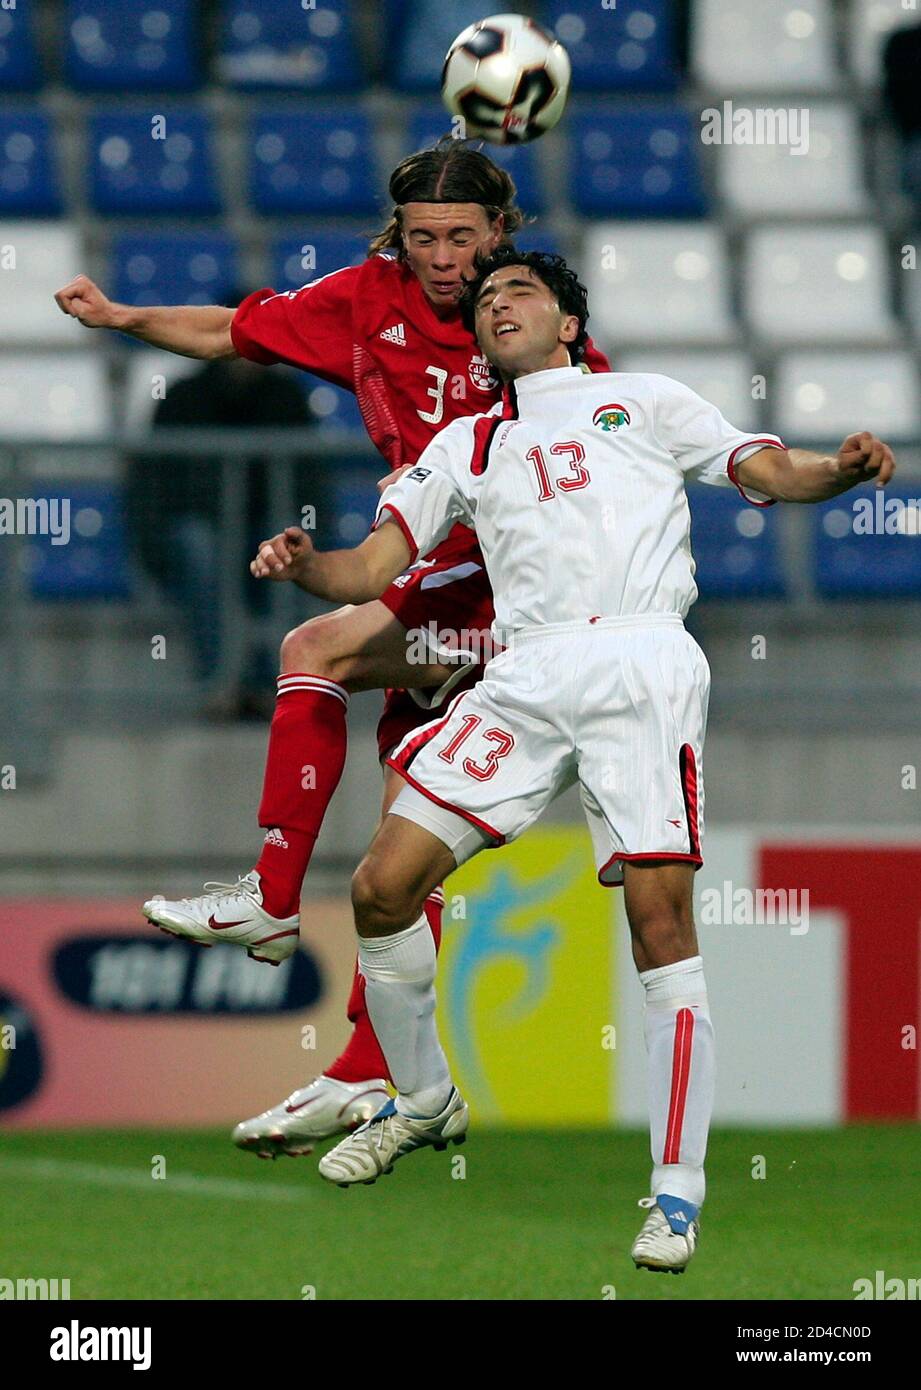 Syria's Jenyat and Canada's Ledgerwood jump for the ball during their World  Youth Championships match in Tilburg. Syria's Aatef Jenyat (R) and Canada's Nik  Ledgerwood jump for the ball during their Group